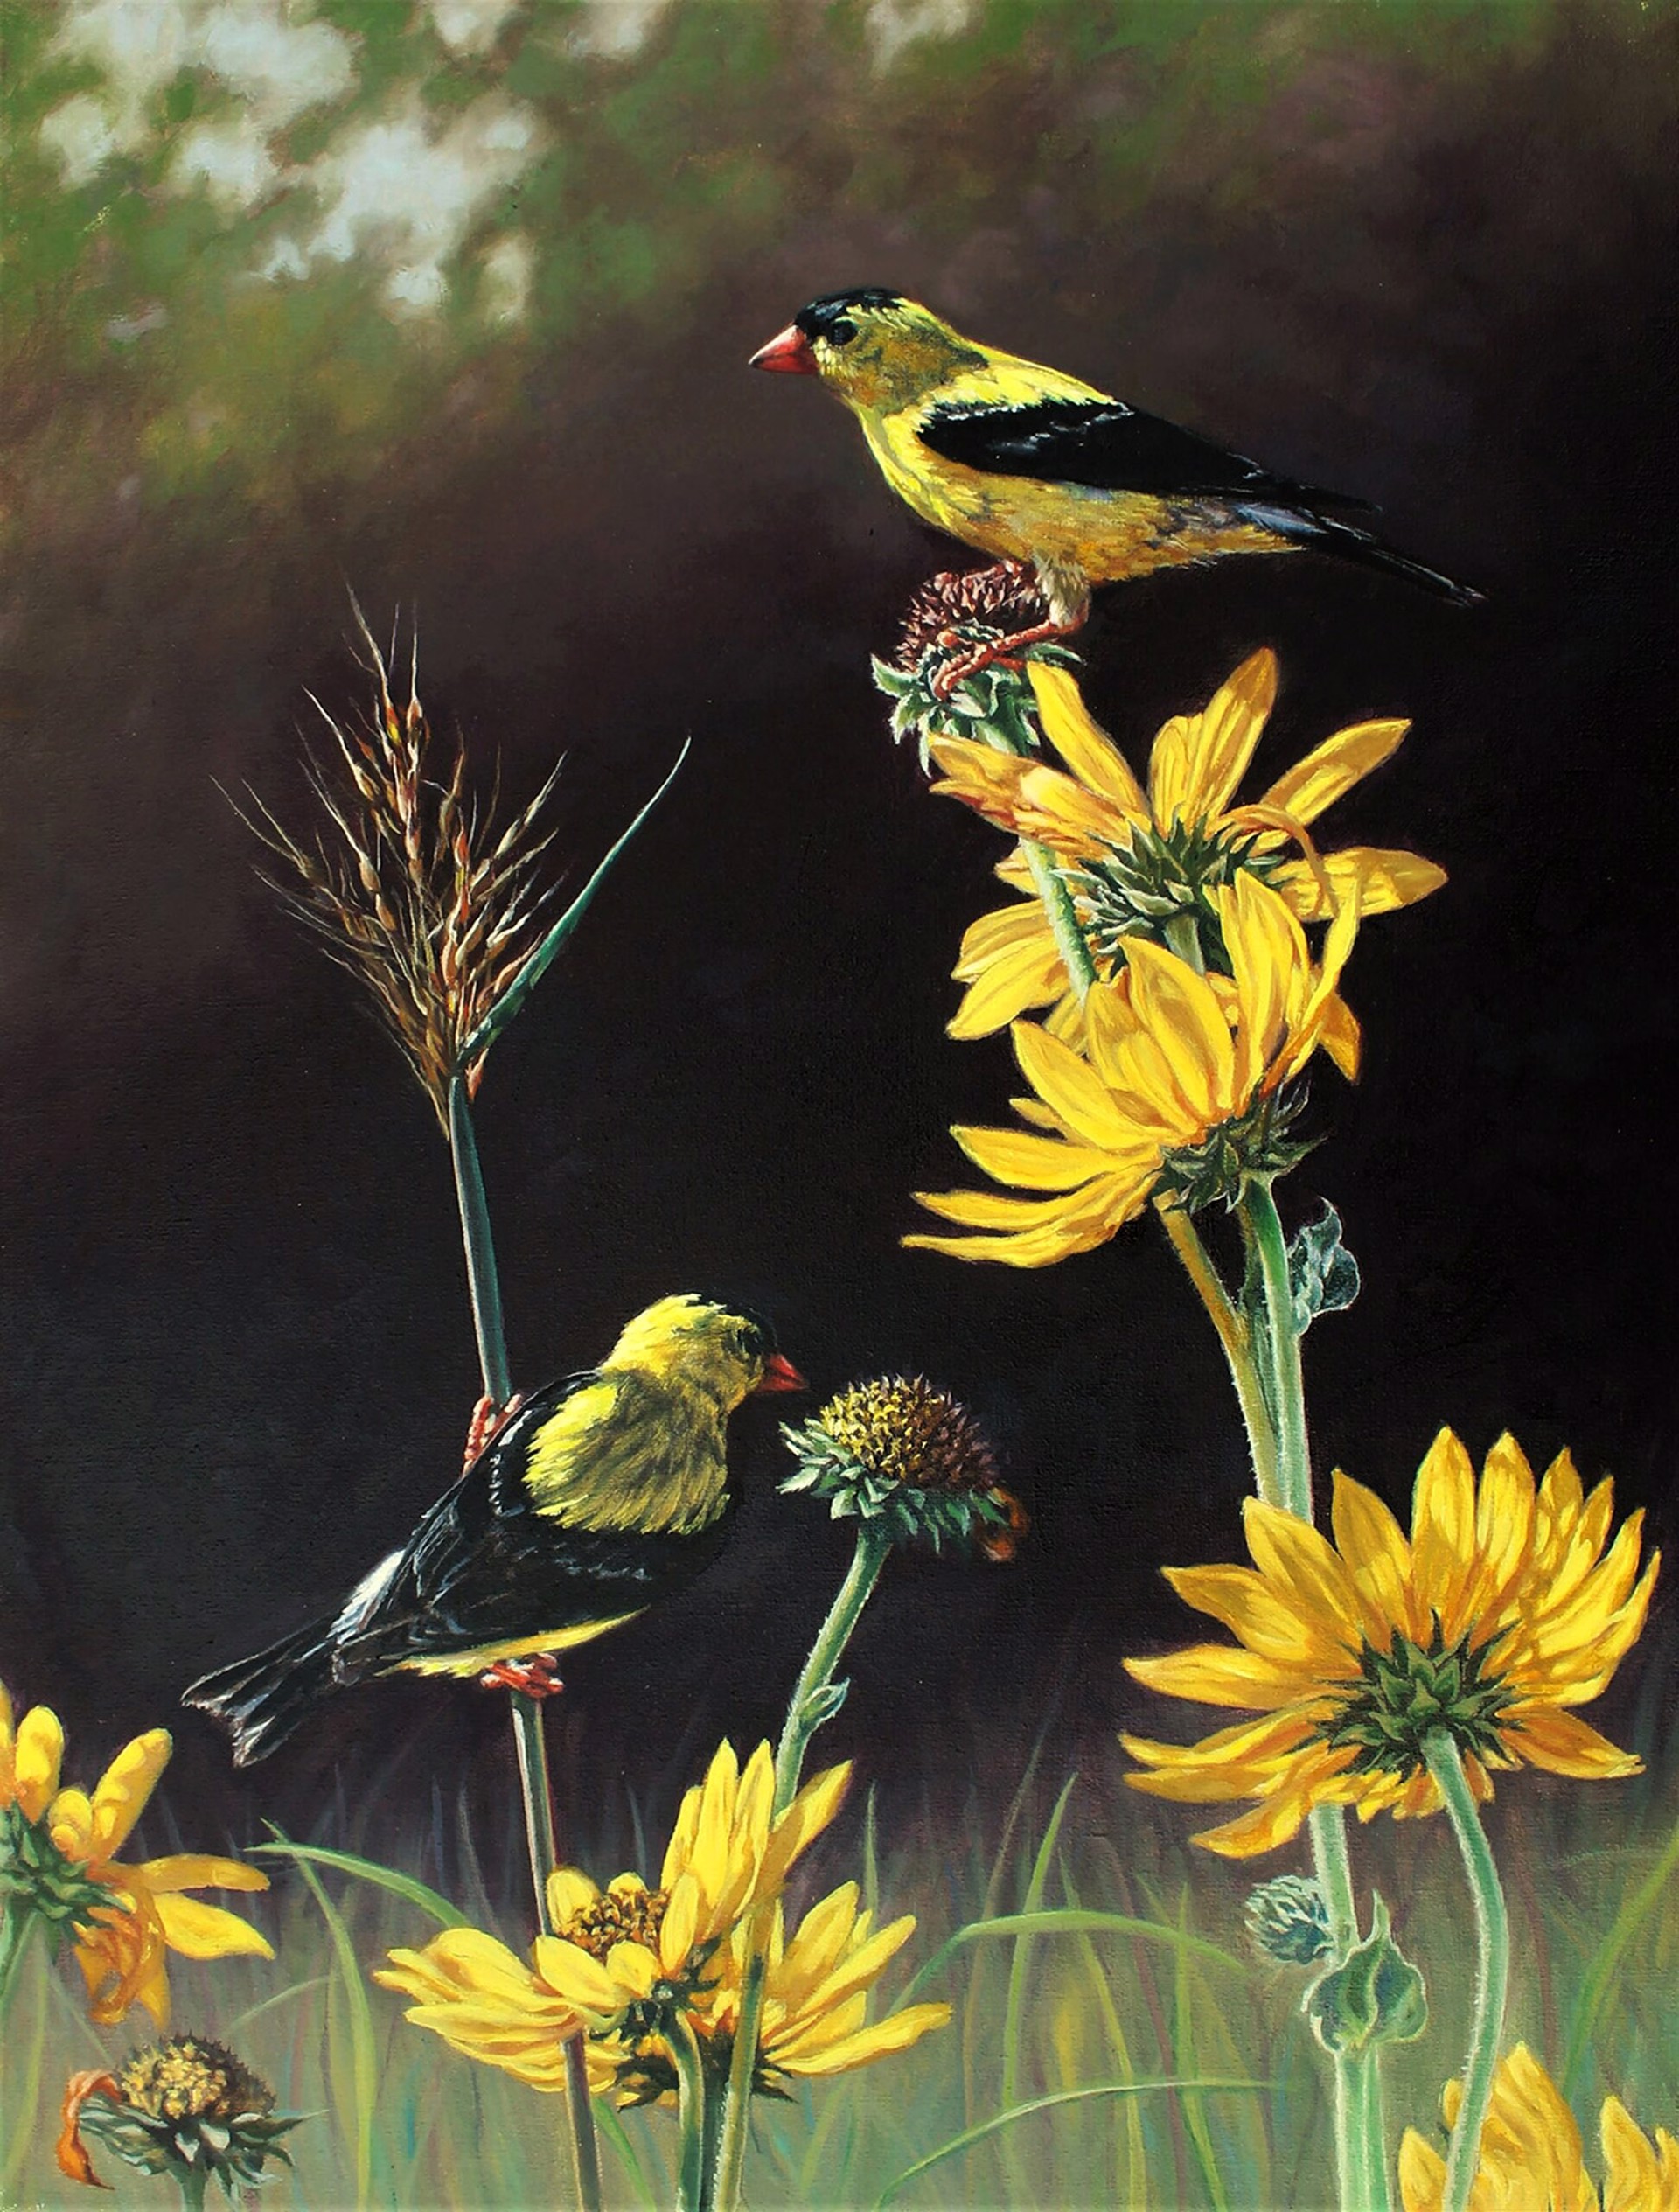 Deborah Brees "Gold in the Morning Sun" by Oil Painters of America